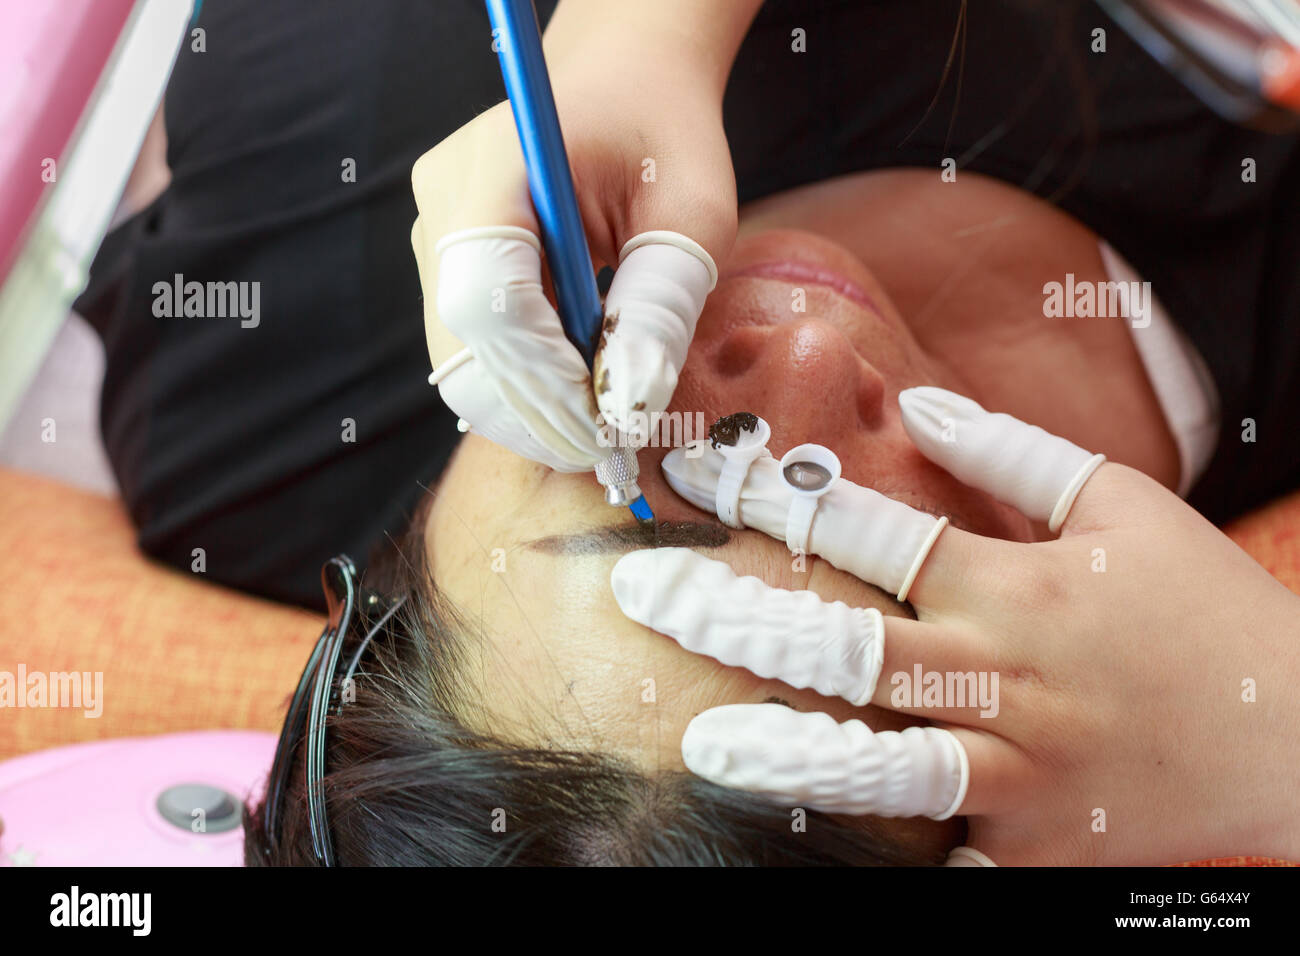 Eyebrows tattooed, a girl is doing a tattoo eyebrow to a customer. Stock Photo